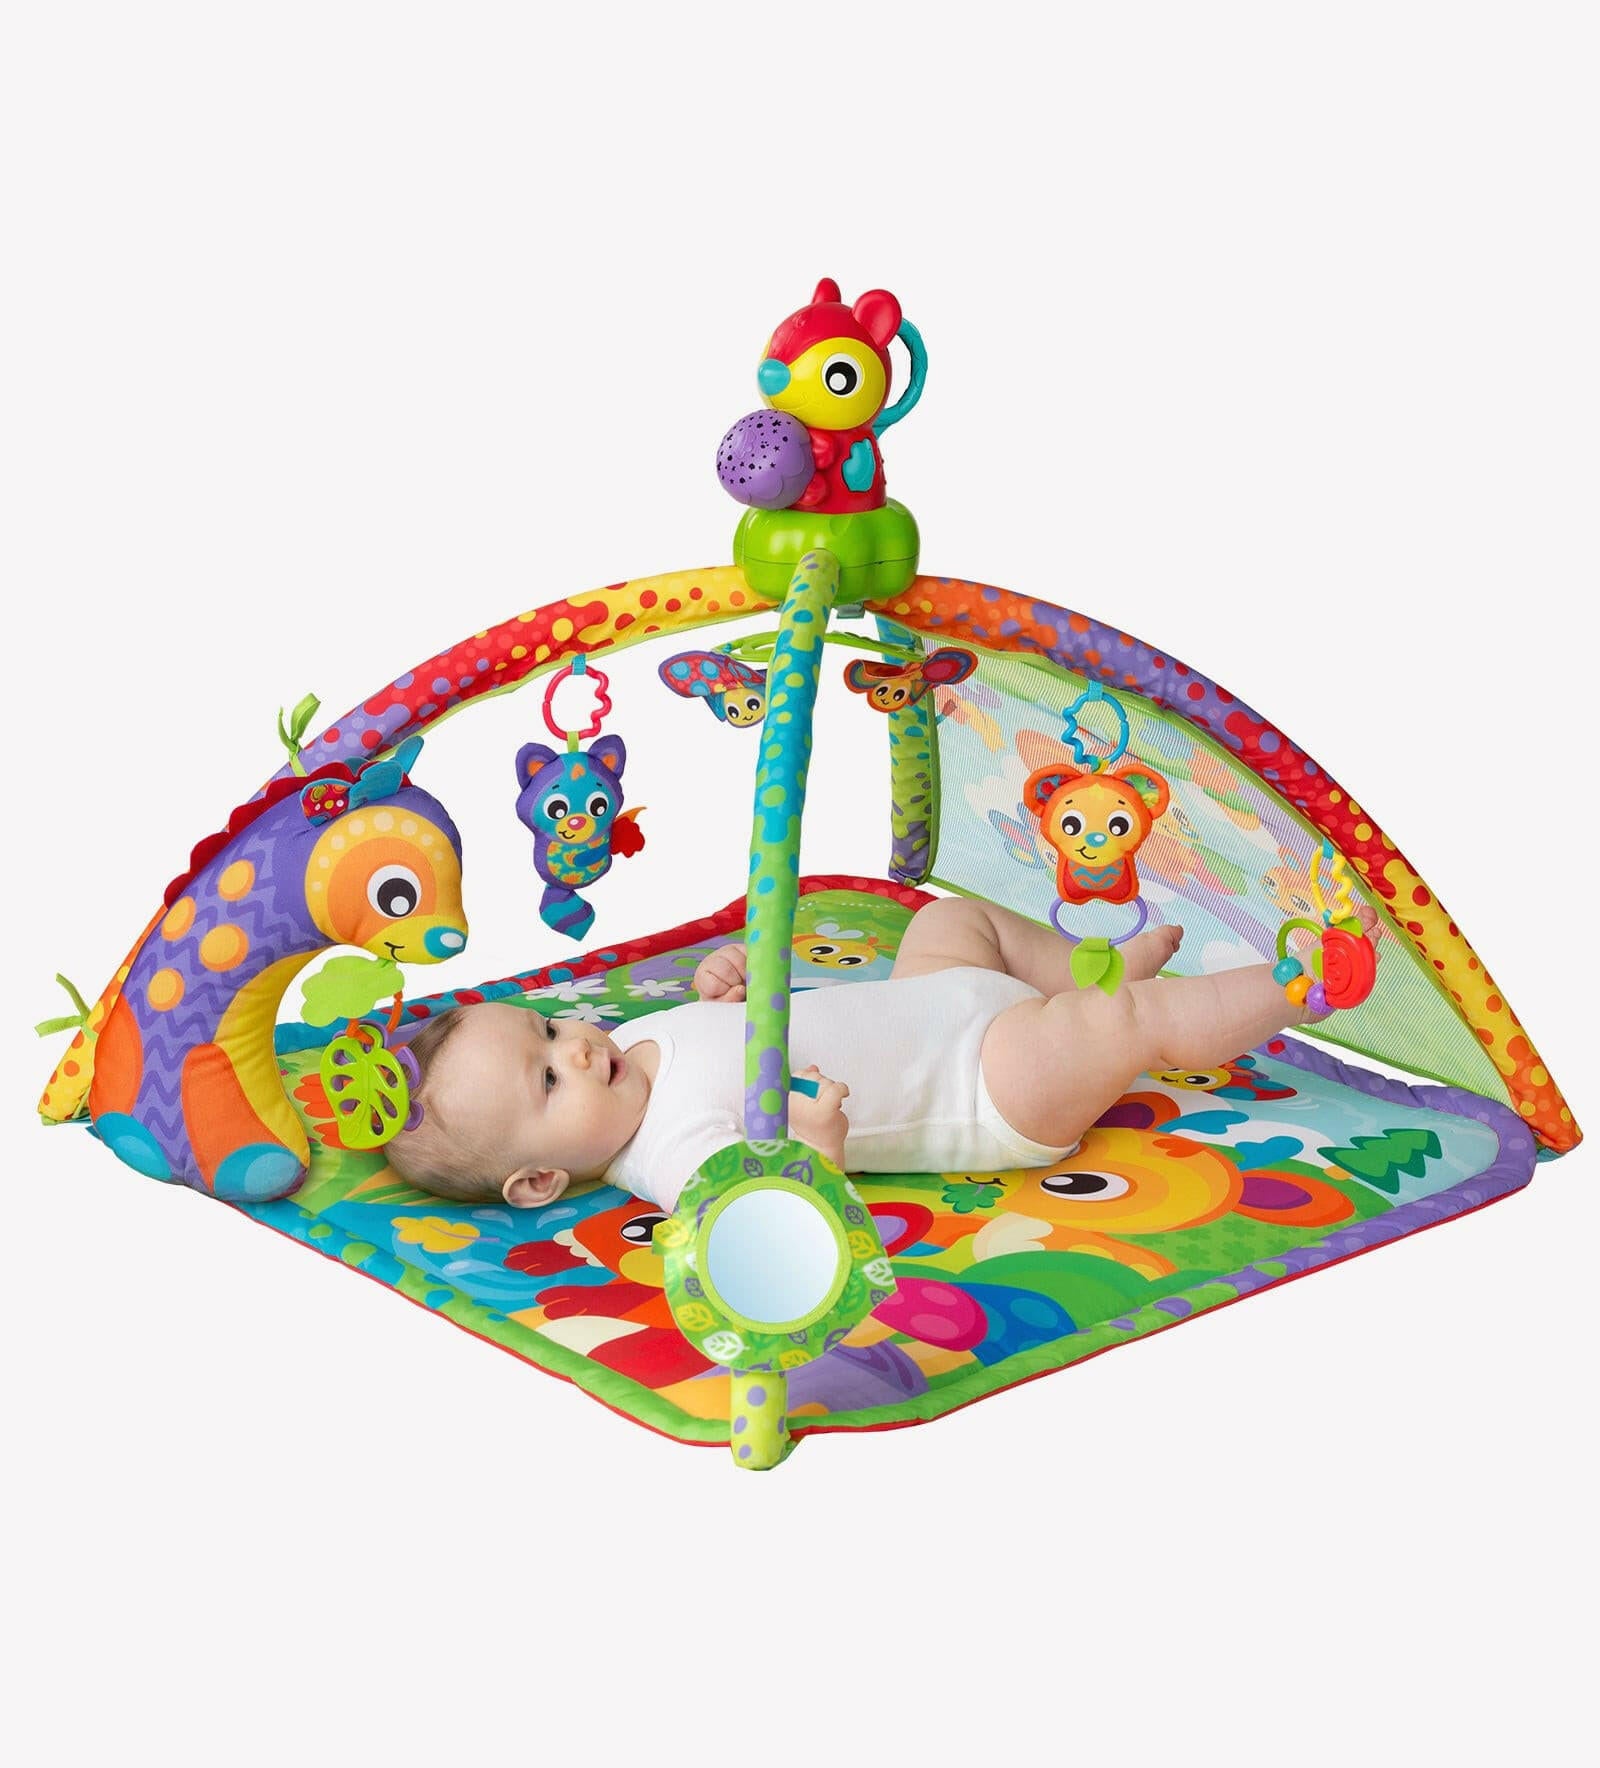 Woodlands Music And Lights Projector Gym - 3 Modes by Playgro.